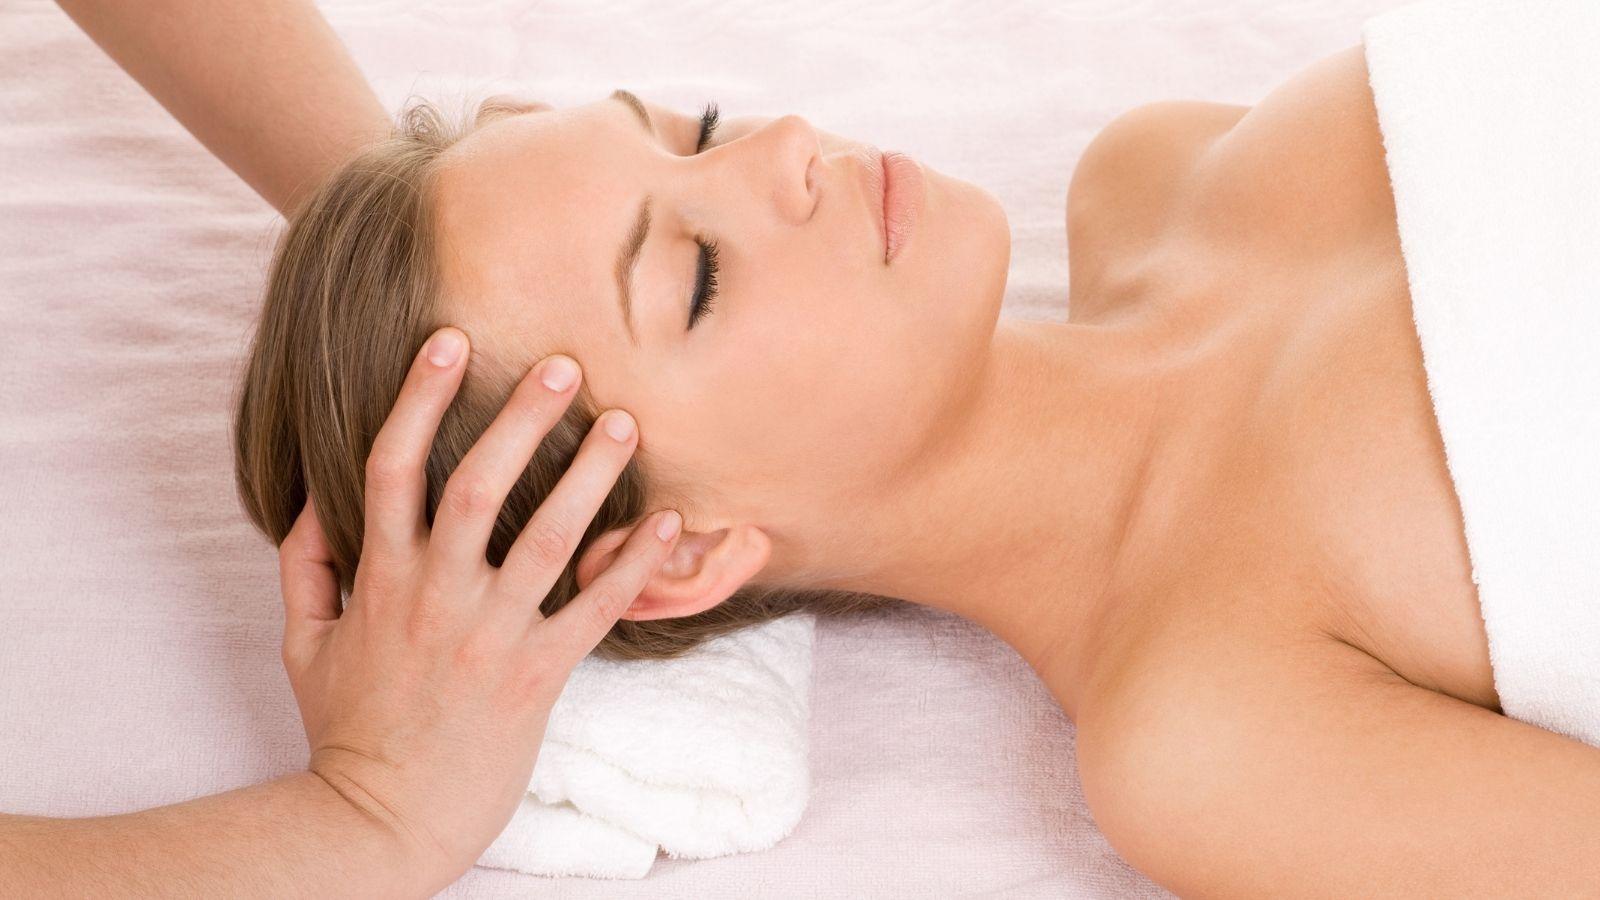 Image of a lady lying down having Indian Head Massage Boroughbridge. The lady has brown hair and has hands on her head. She is wearing a white towel